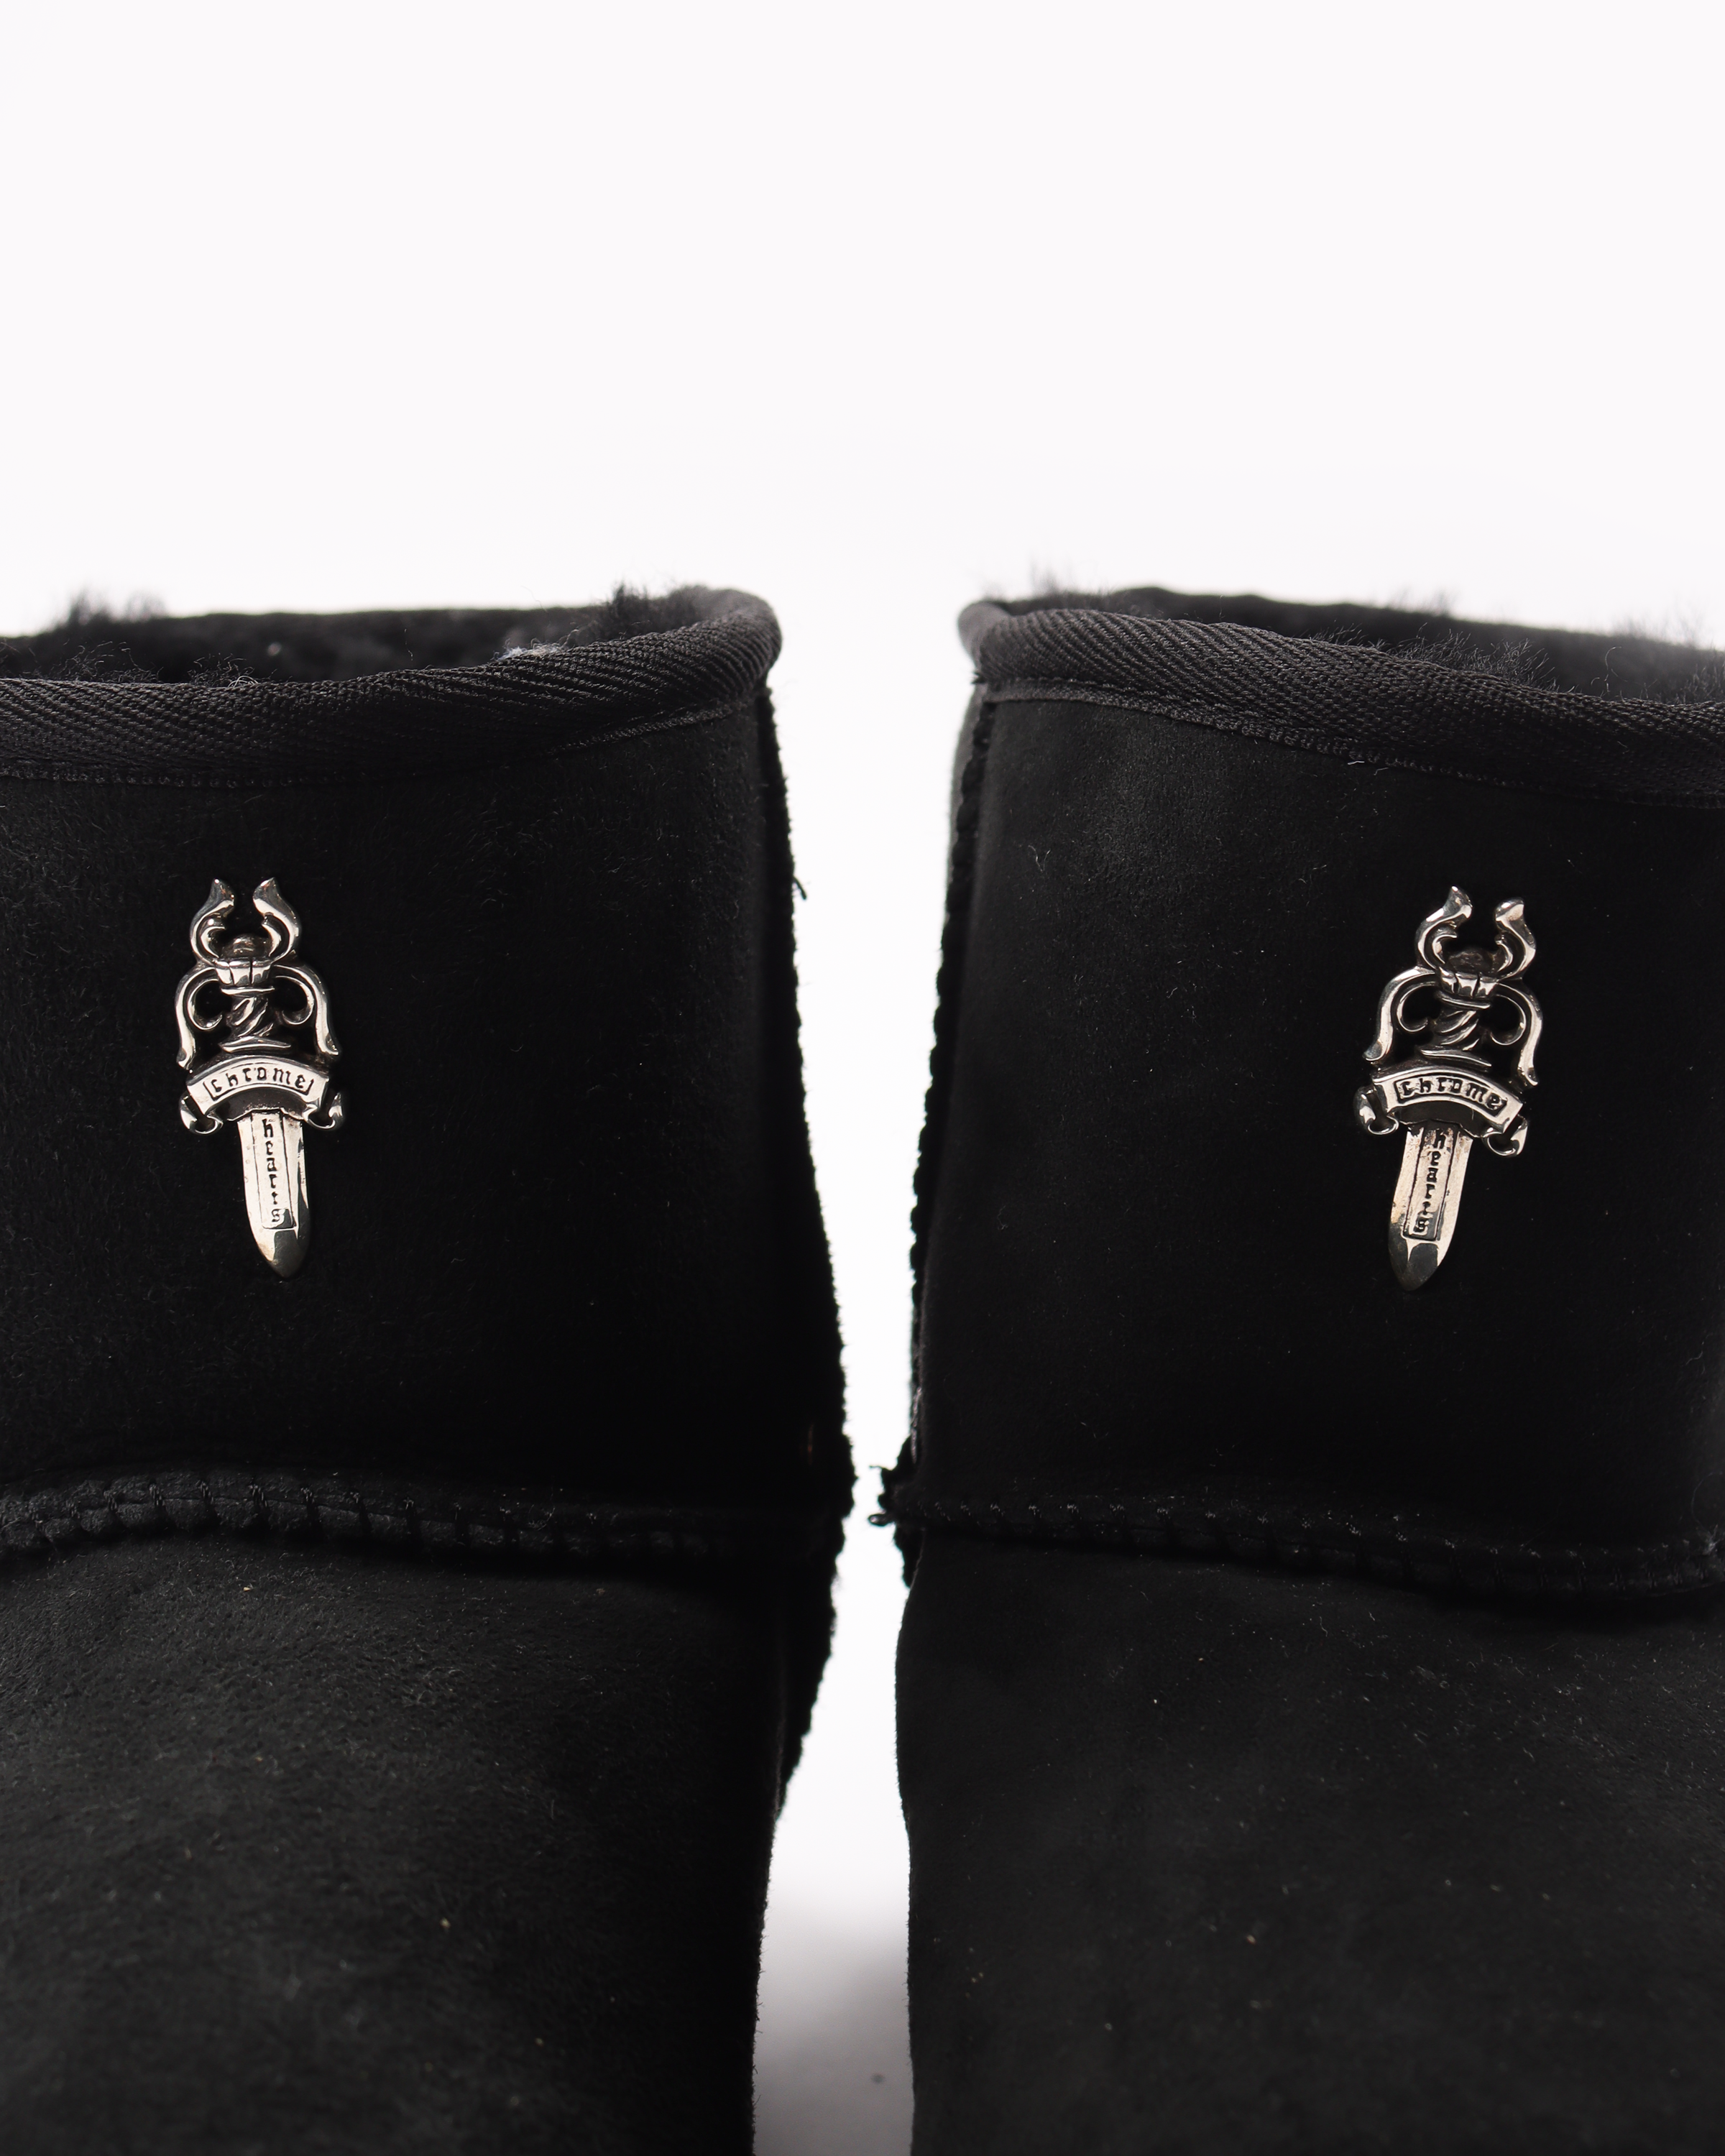 UGG Collaboration Mouton Boots